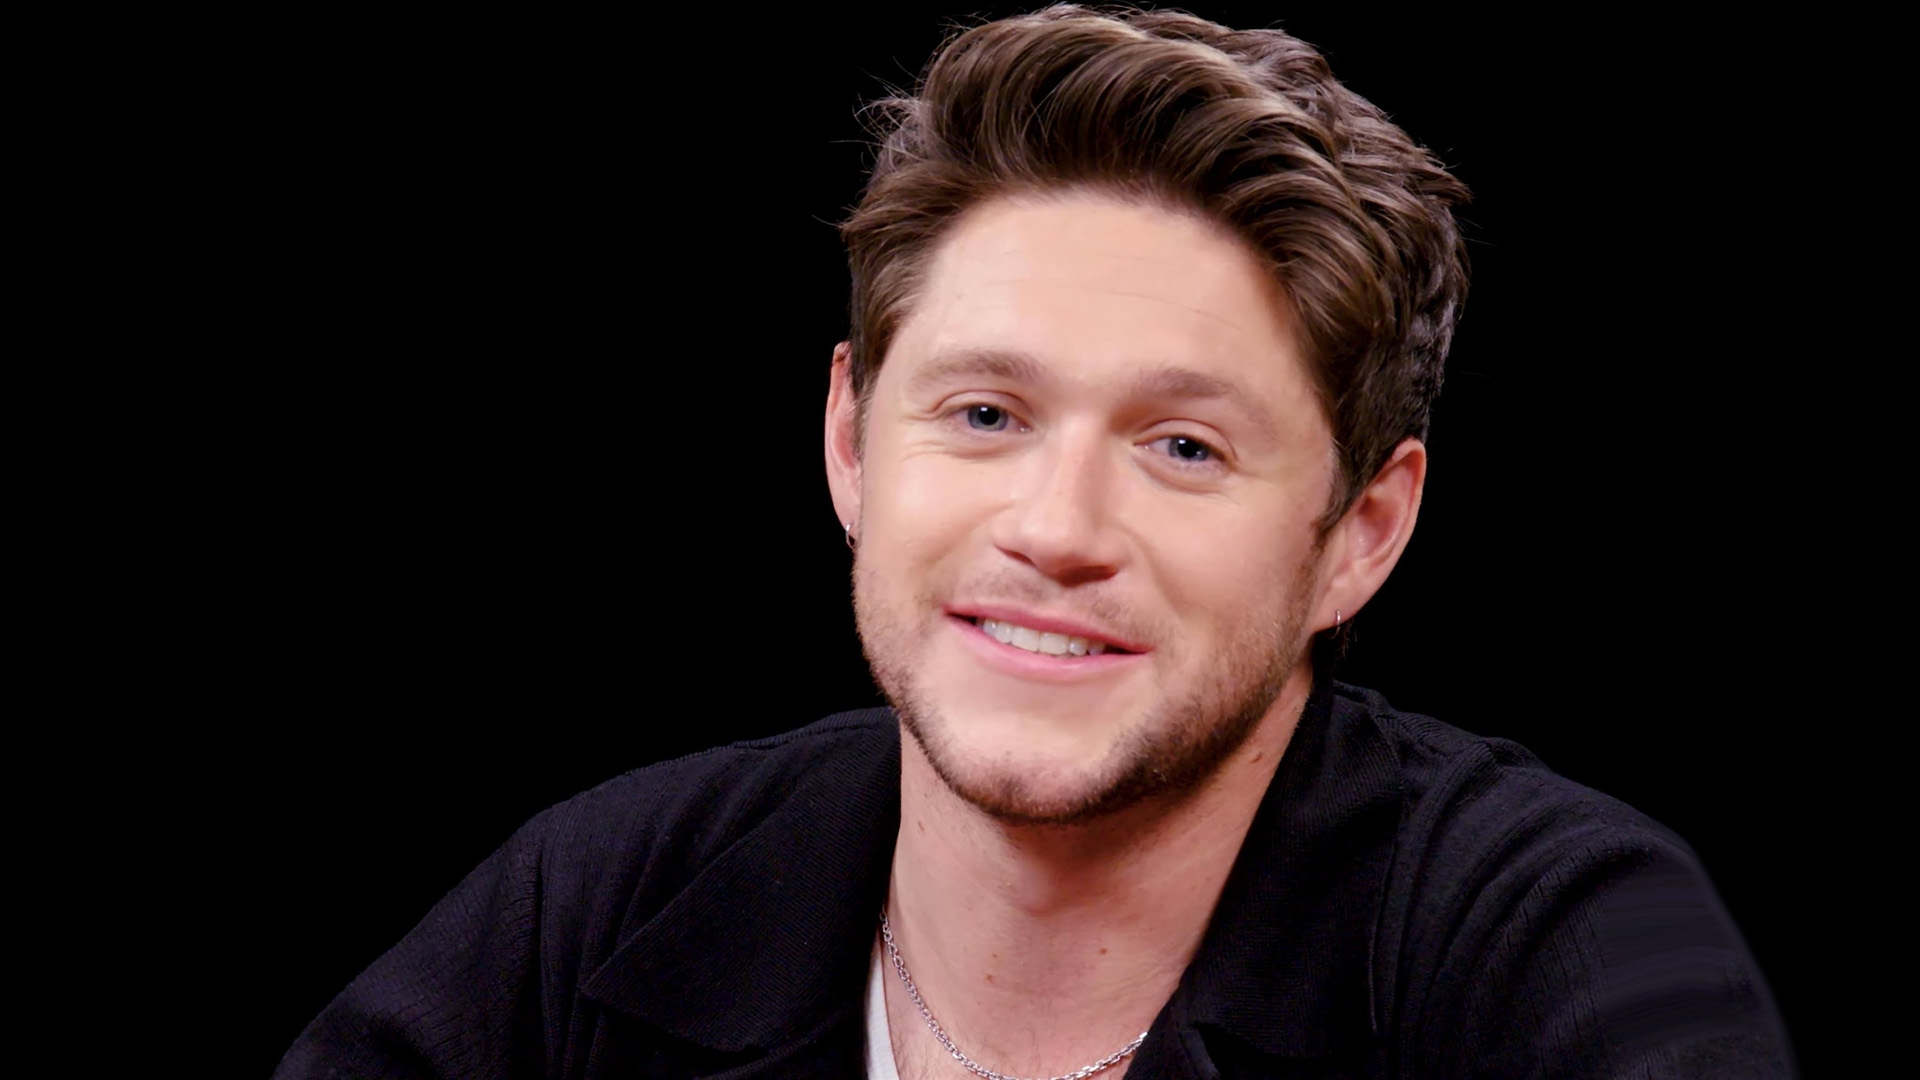 The Voice's Best Decision Yet: Niall Horan Makes His Mark As A New Coach